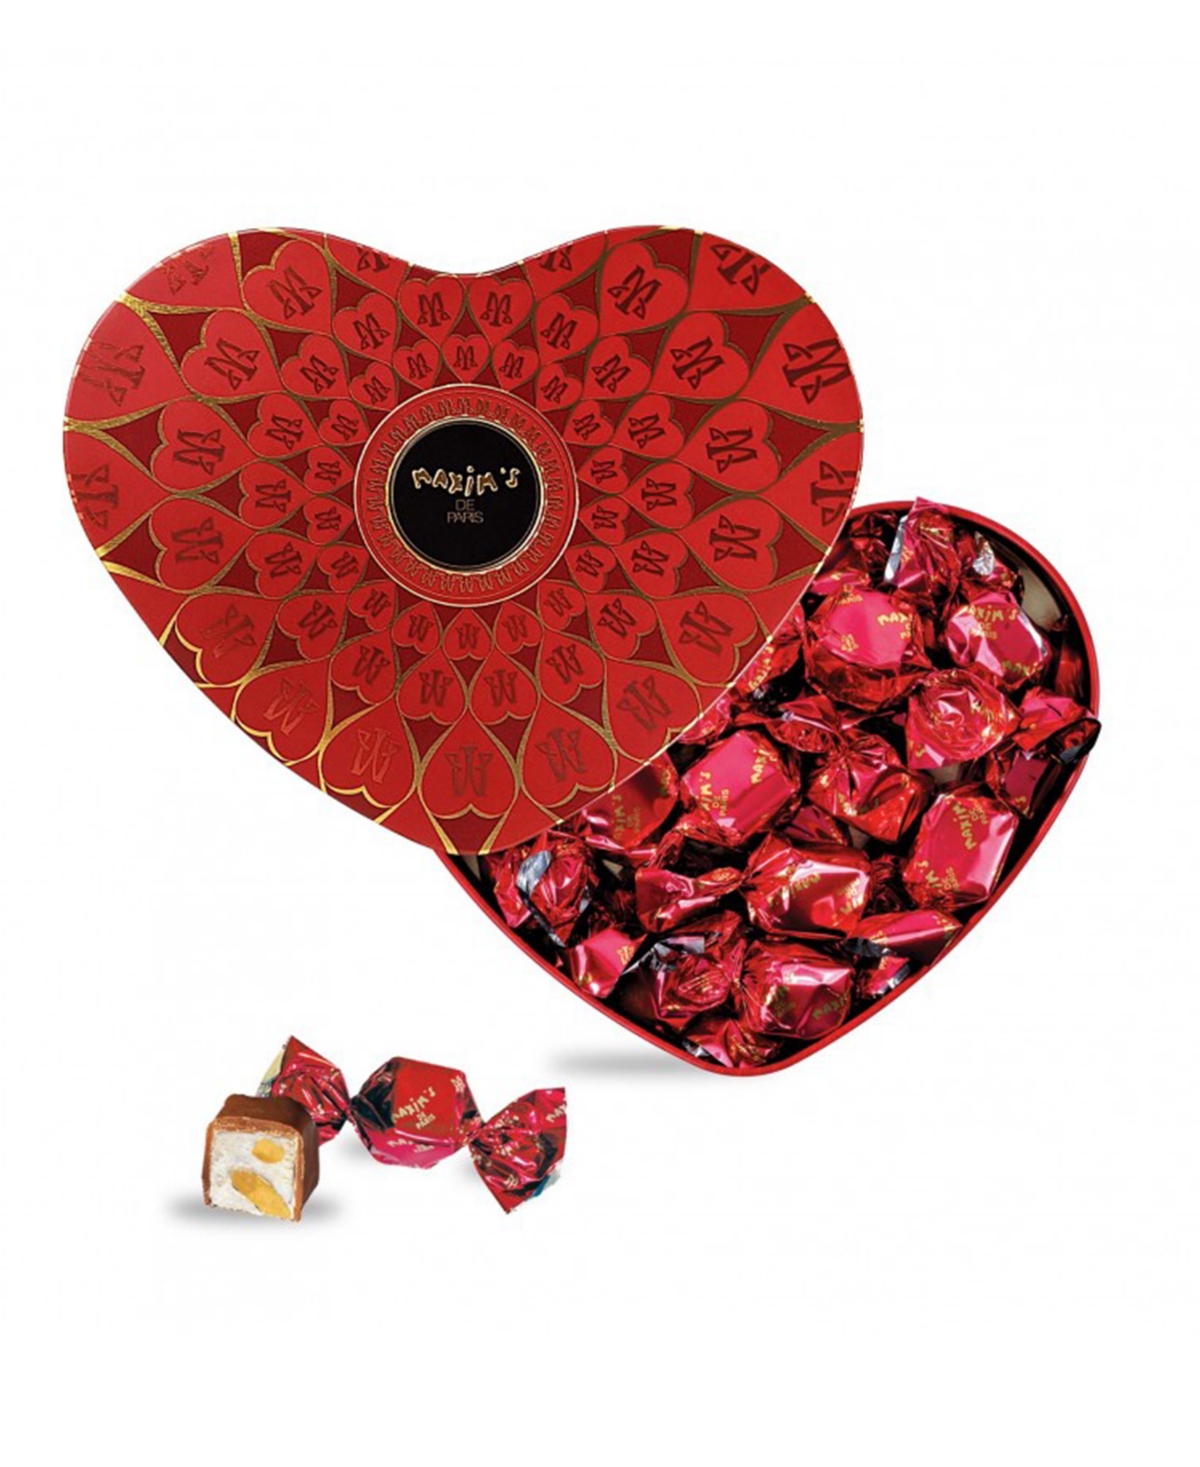 Maxim's De Paris Heart Shaped Tin Box Filled With Chocolate Covered Nougats In No Color